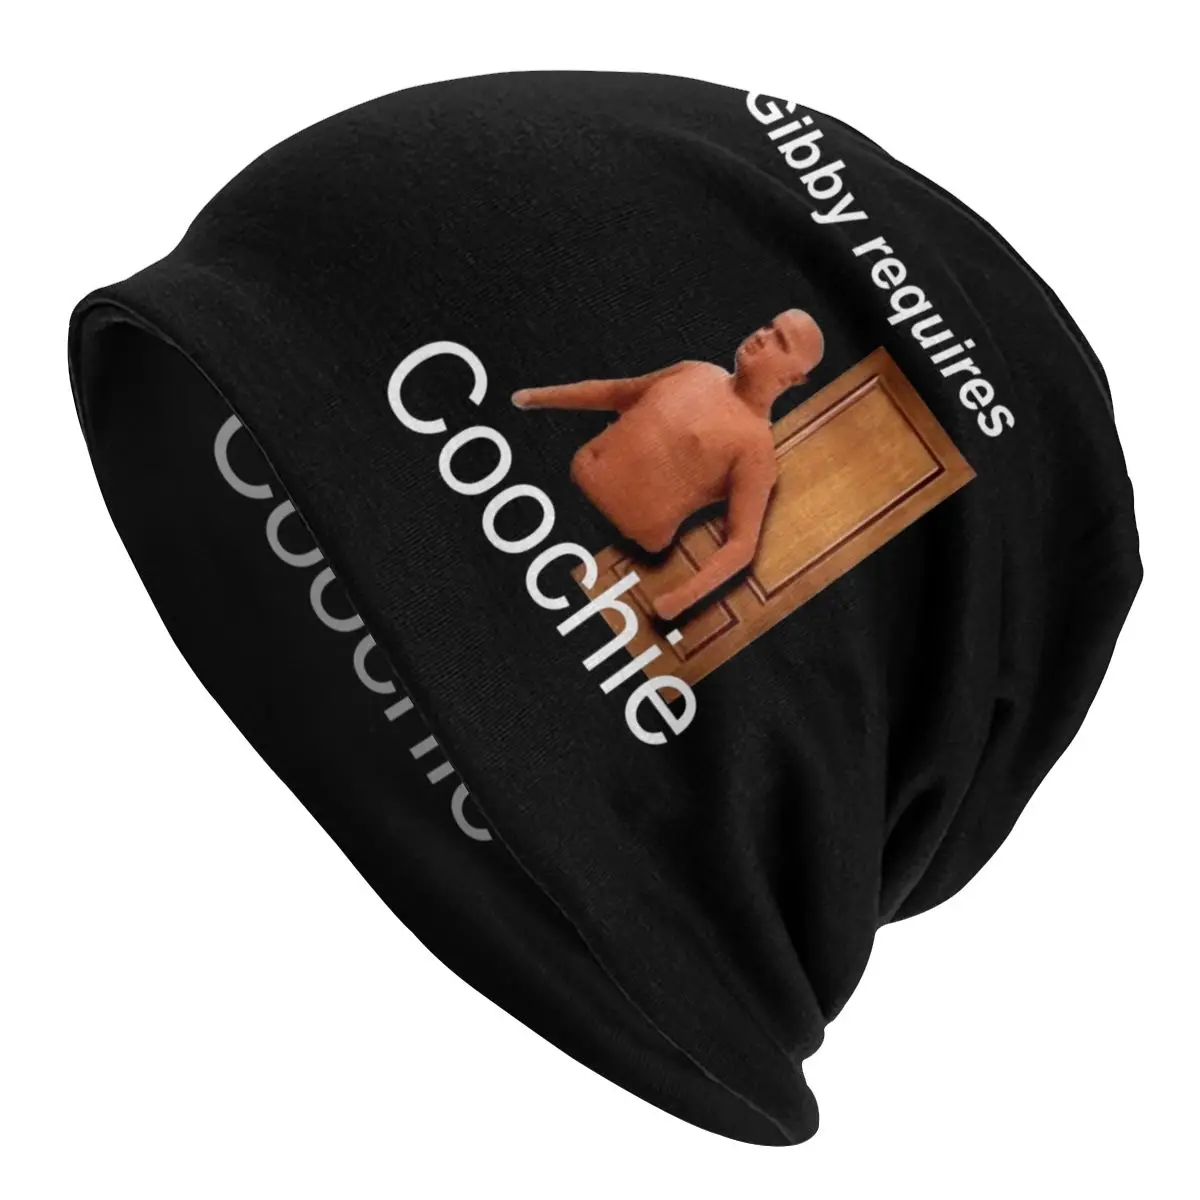 

Gibby Requires Coochie Black Bonnet Femme Cool Knitted Hat For Women Men Autumn Winter Warm Icarly Meme Cartoon Beanies Caps